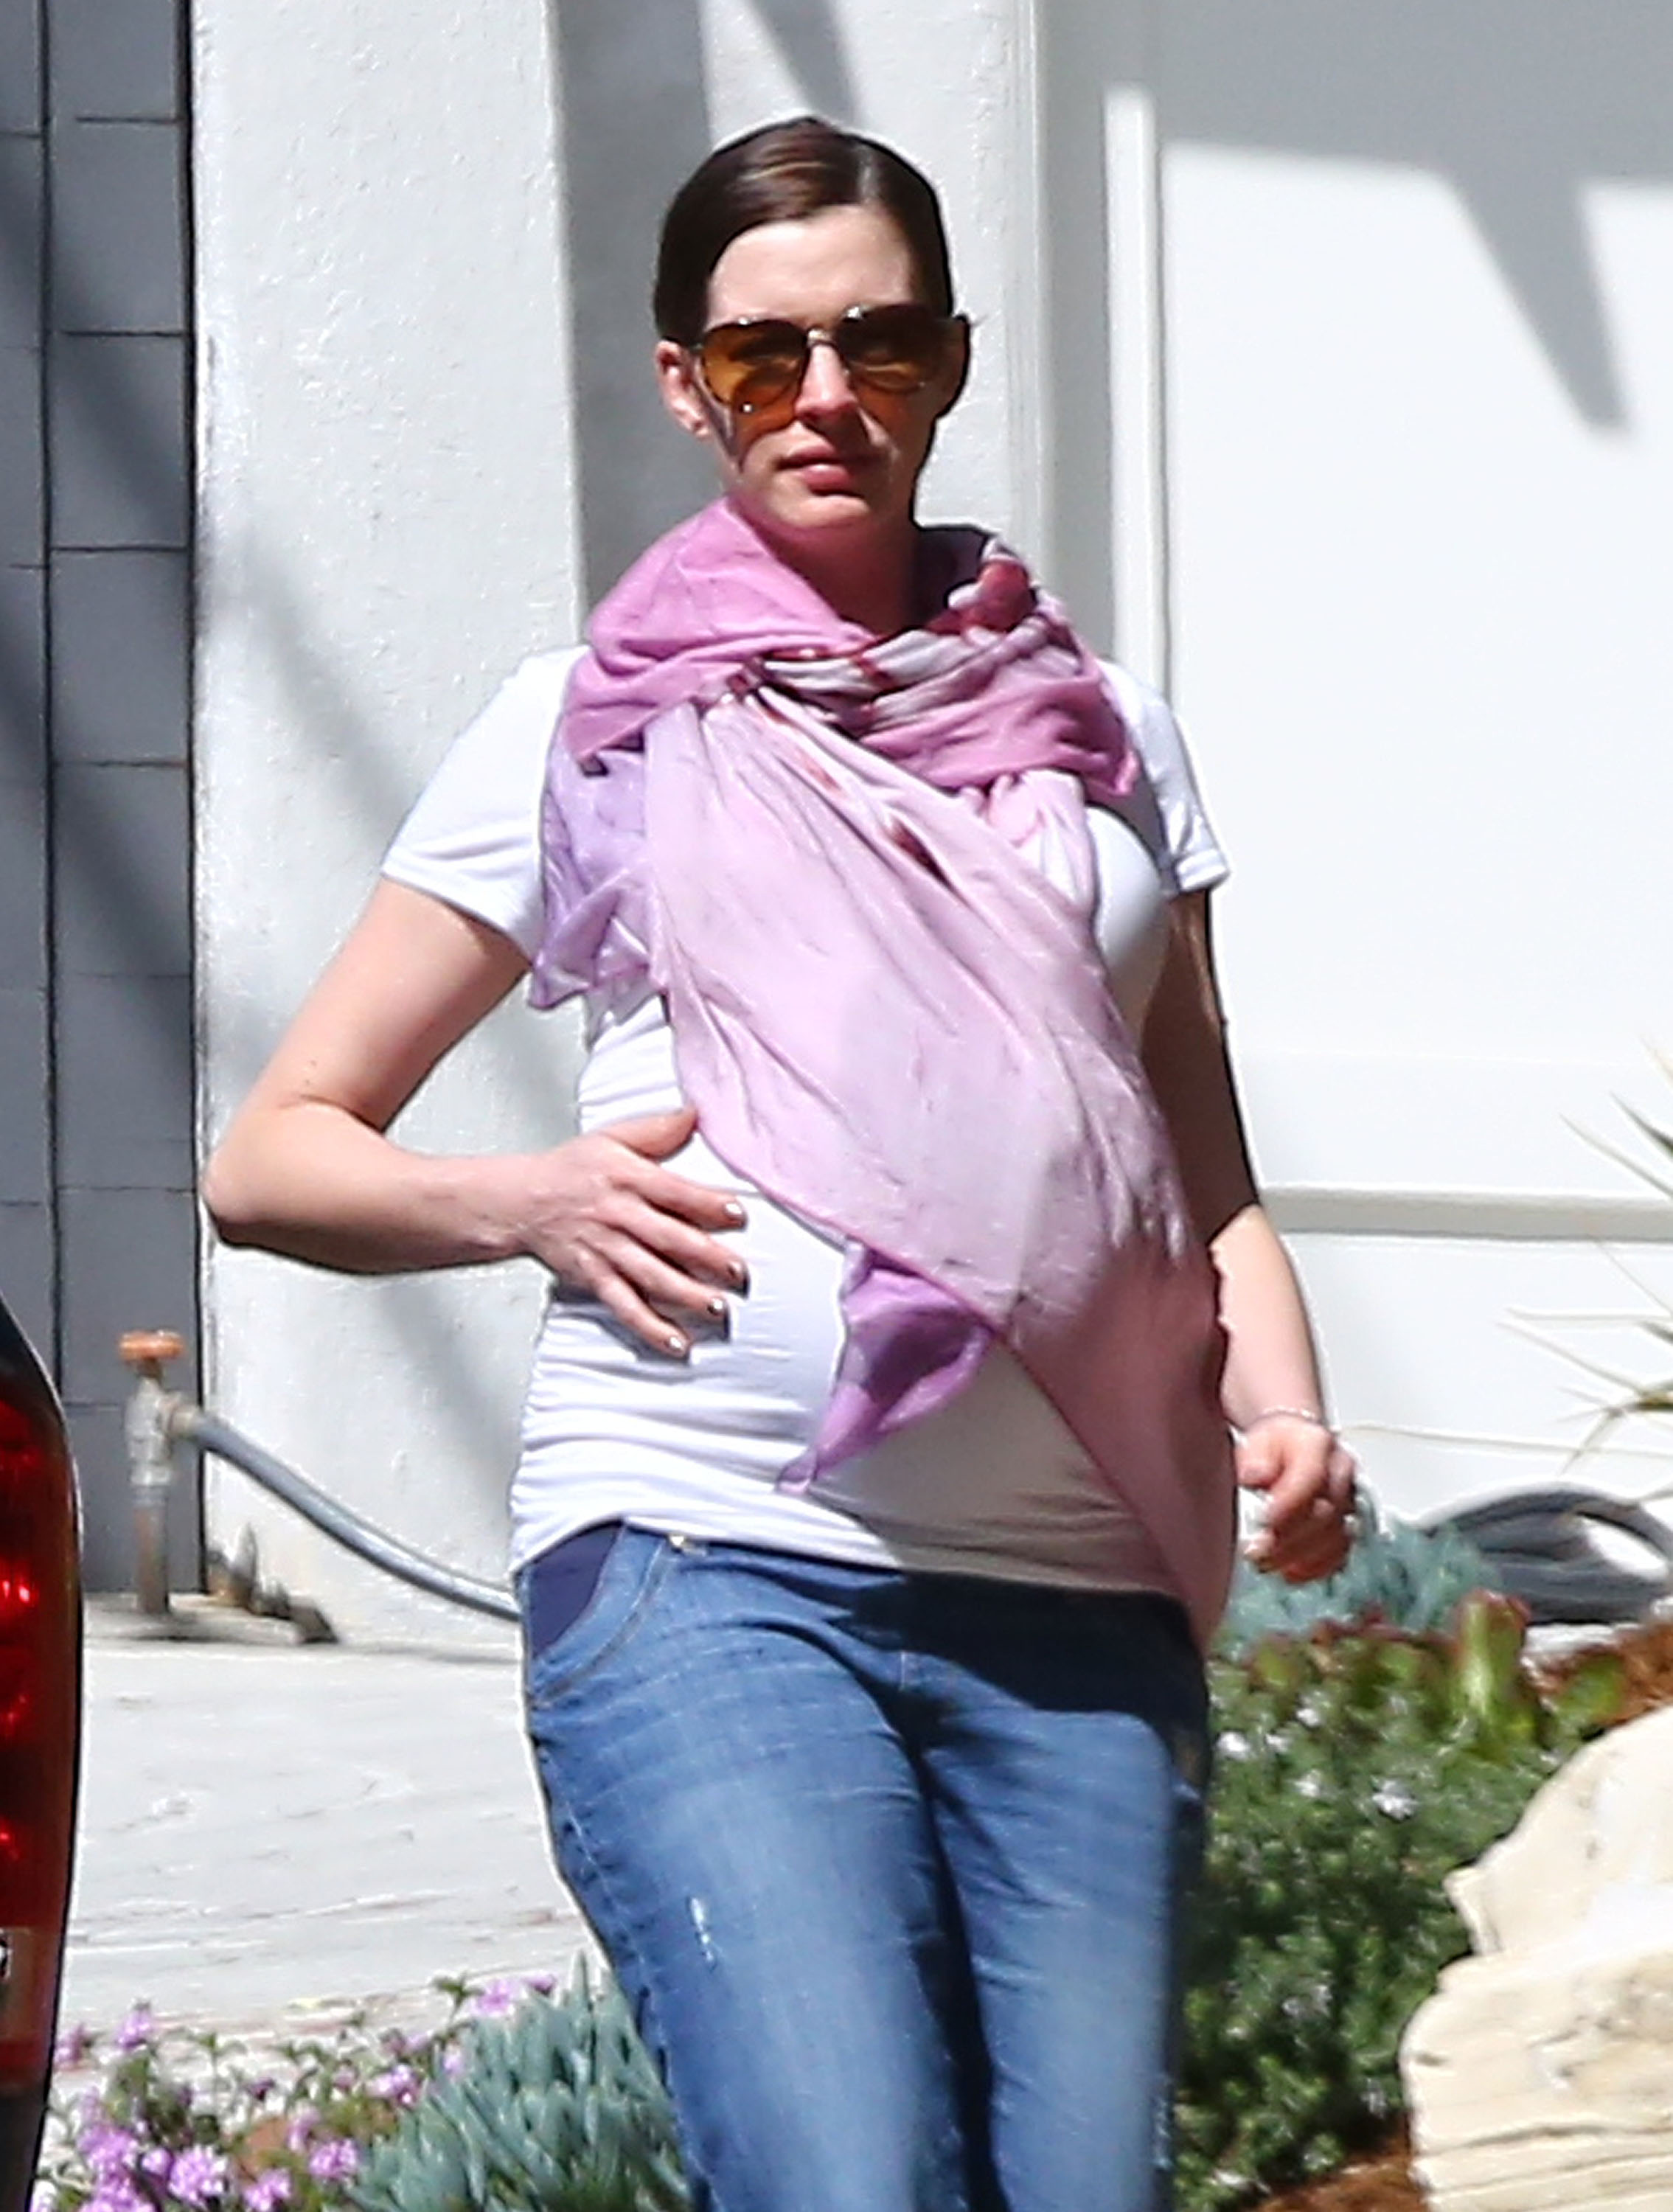 Exclusive... 51984531 Pregnant Anne Hathaway shows off her massive baby bump while out for a stroll in Los Angeles, California on March 1, 2016. Anne is expecting her first child with husband Adam Shulman FameFlynet, Inc - Beverly Hills, CA, USA - +1 (310) 505-9876